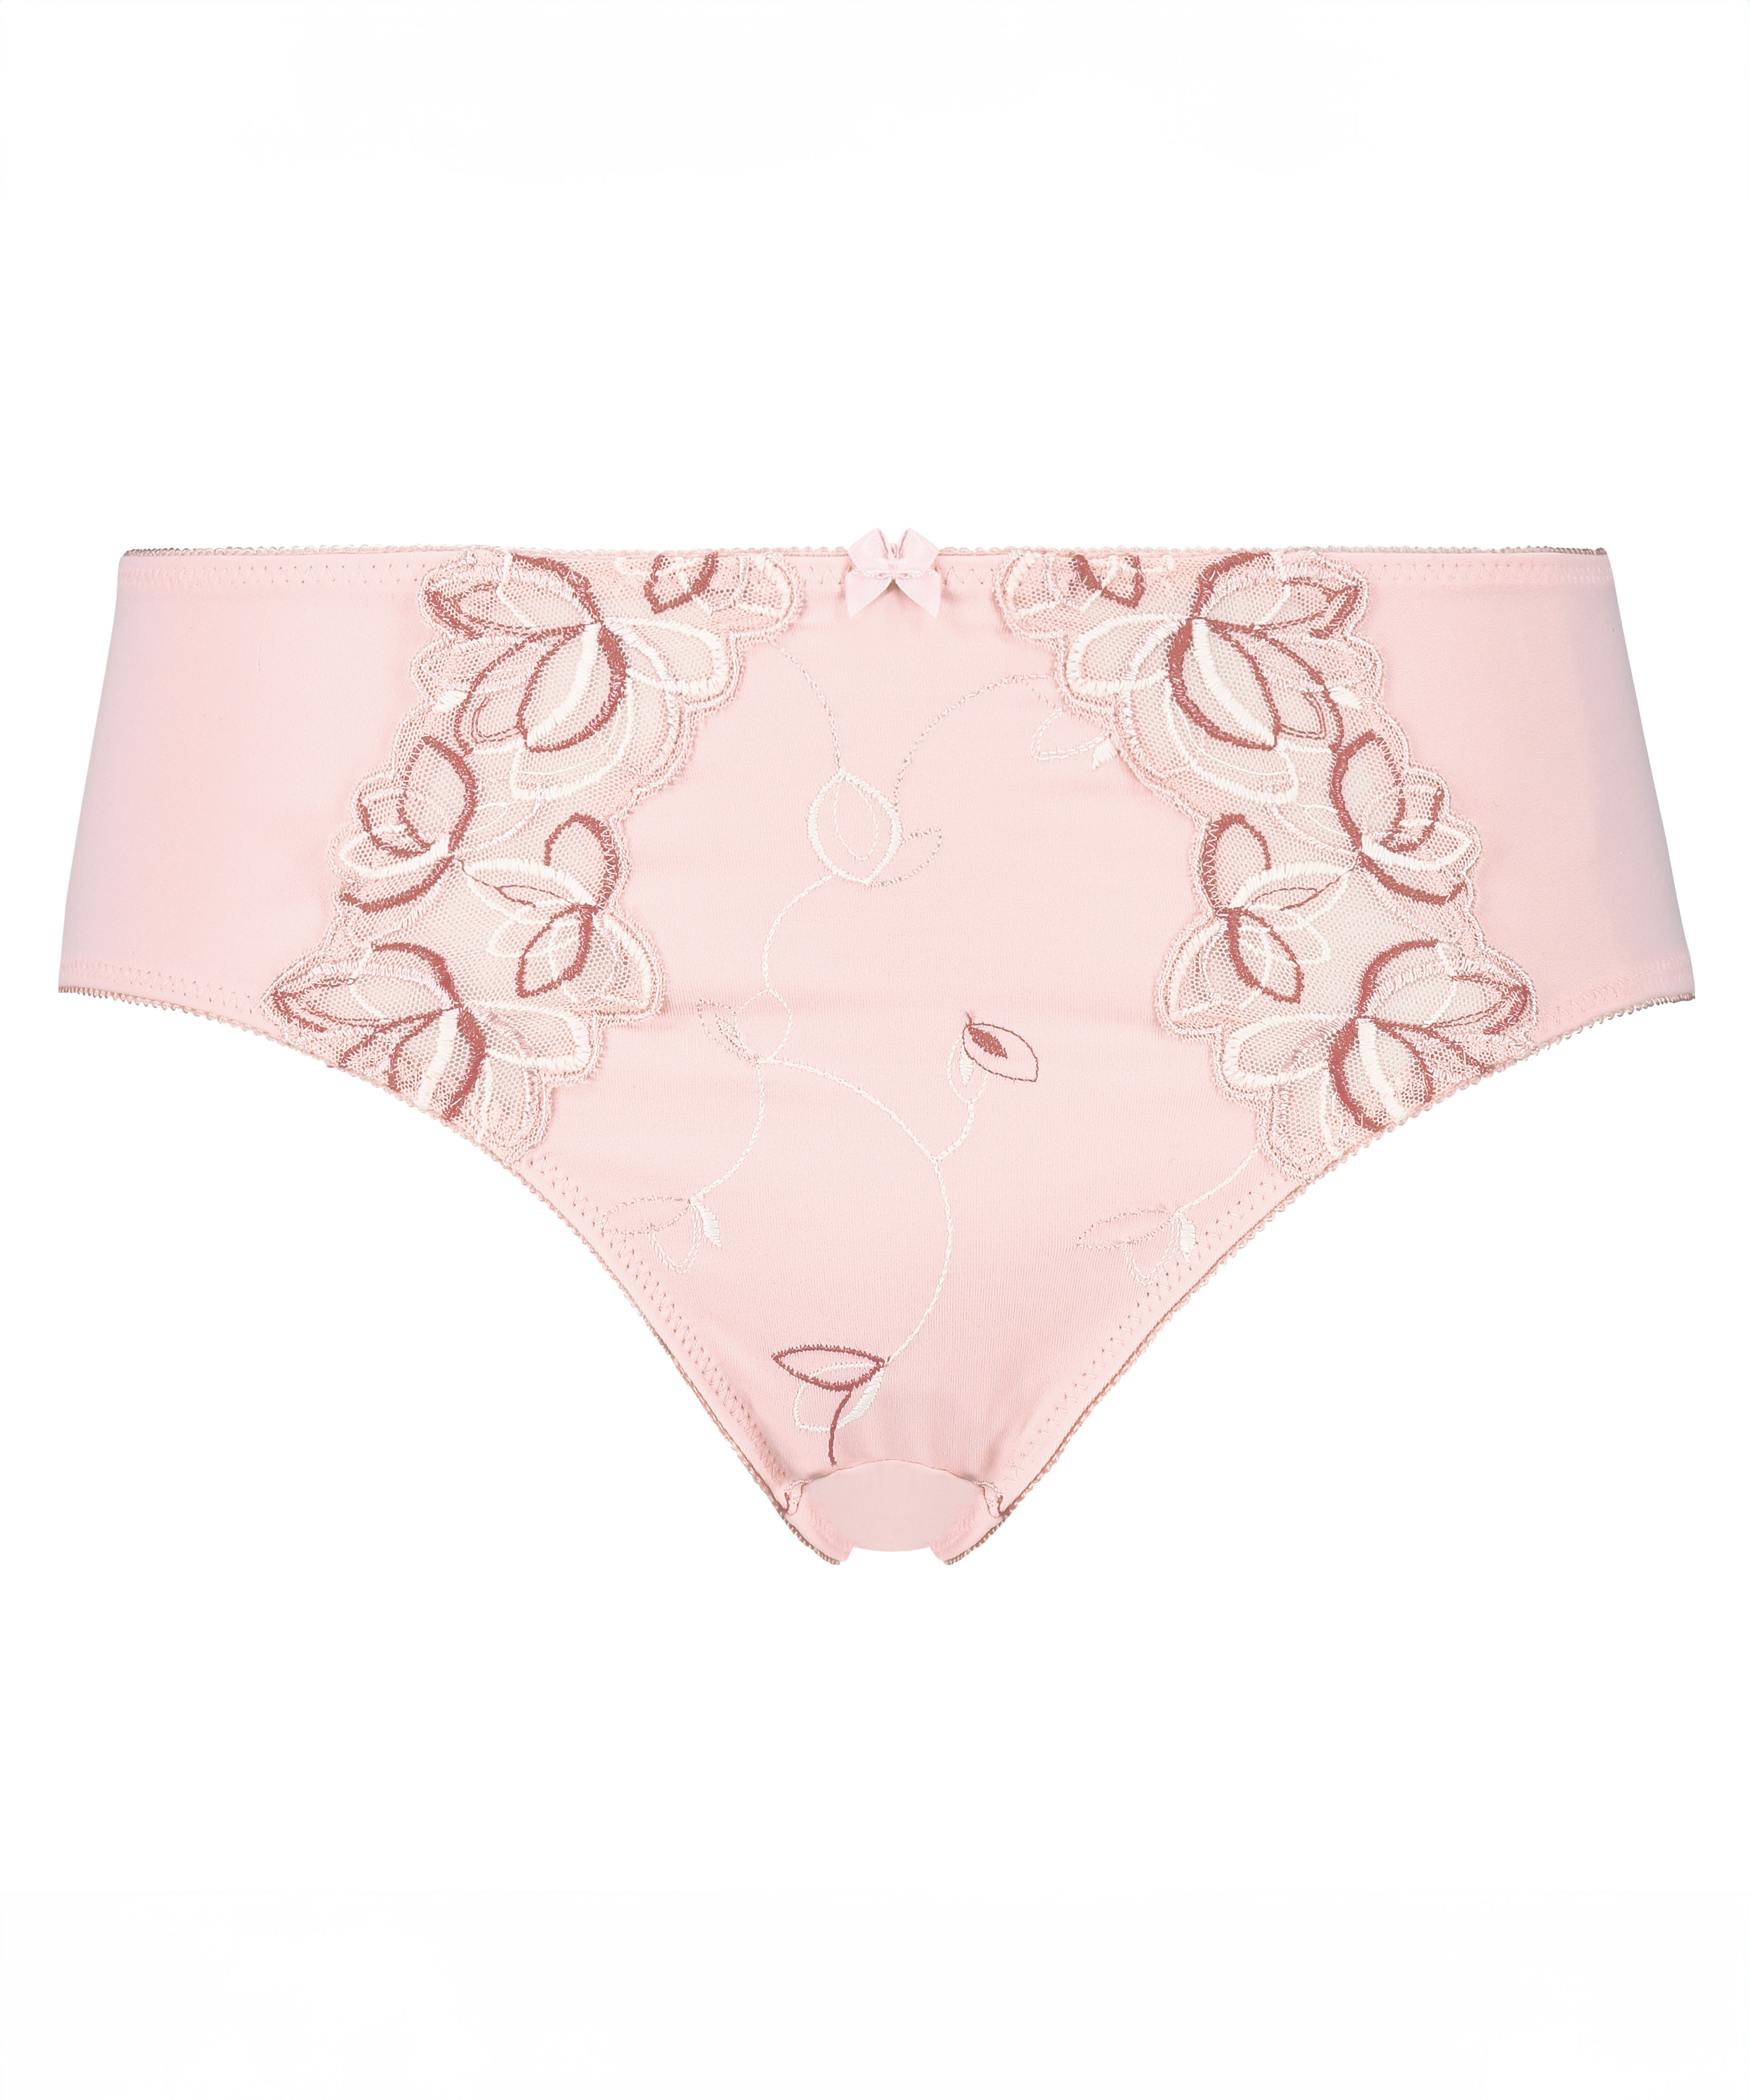 Diva high knickers, Pink, main